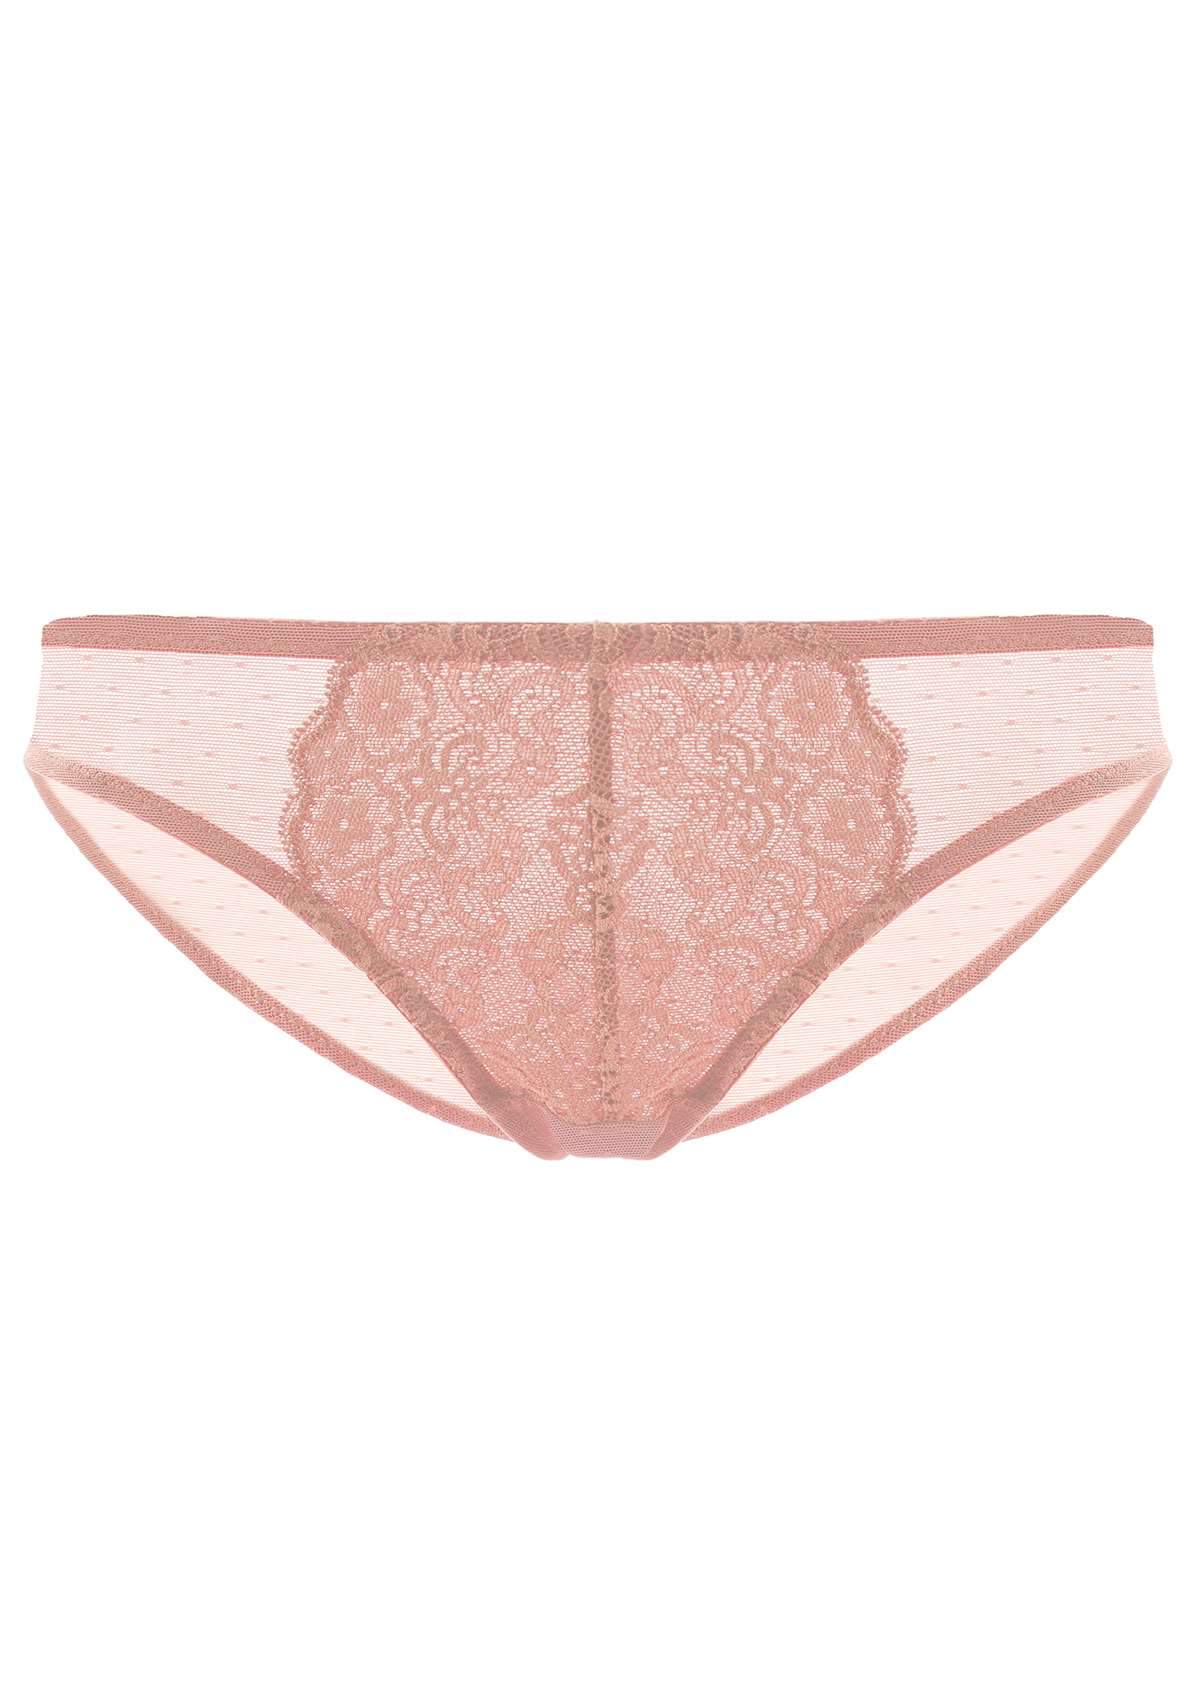 HSIA Nymphaea Front Floral Lace Mesh Back Comfort Bikini Underwear - M / Pink